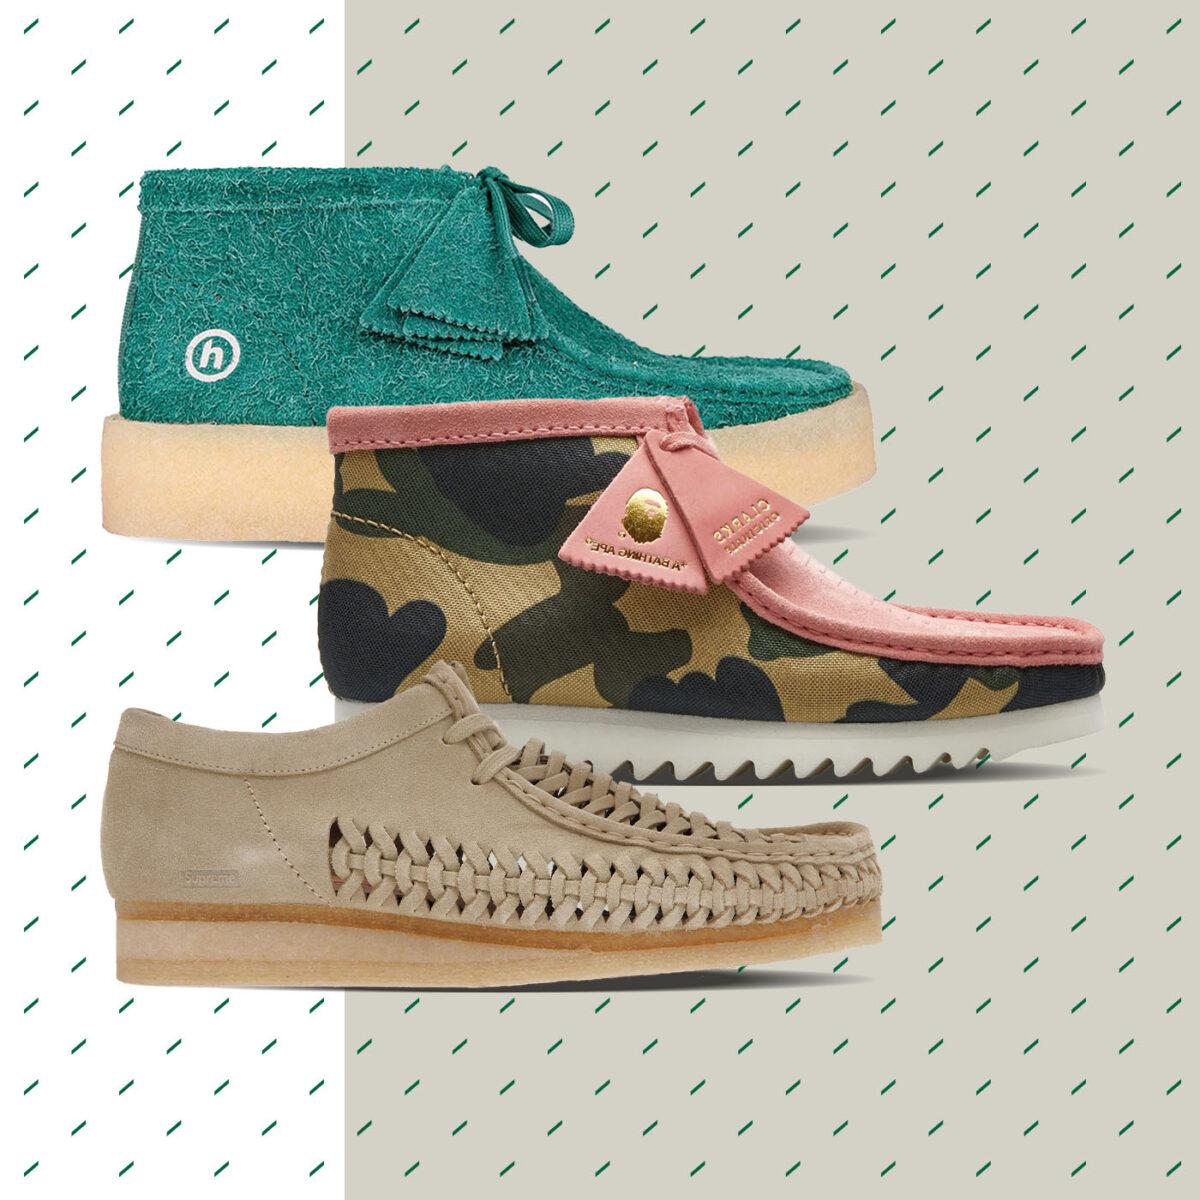 locker tråd Blive ved The Buyer's Guide: Clarks Shoes - StockX News